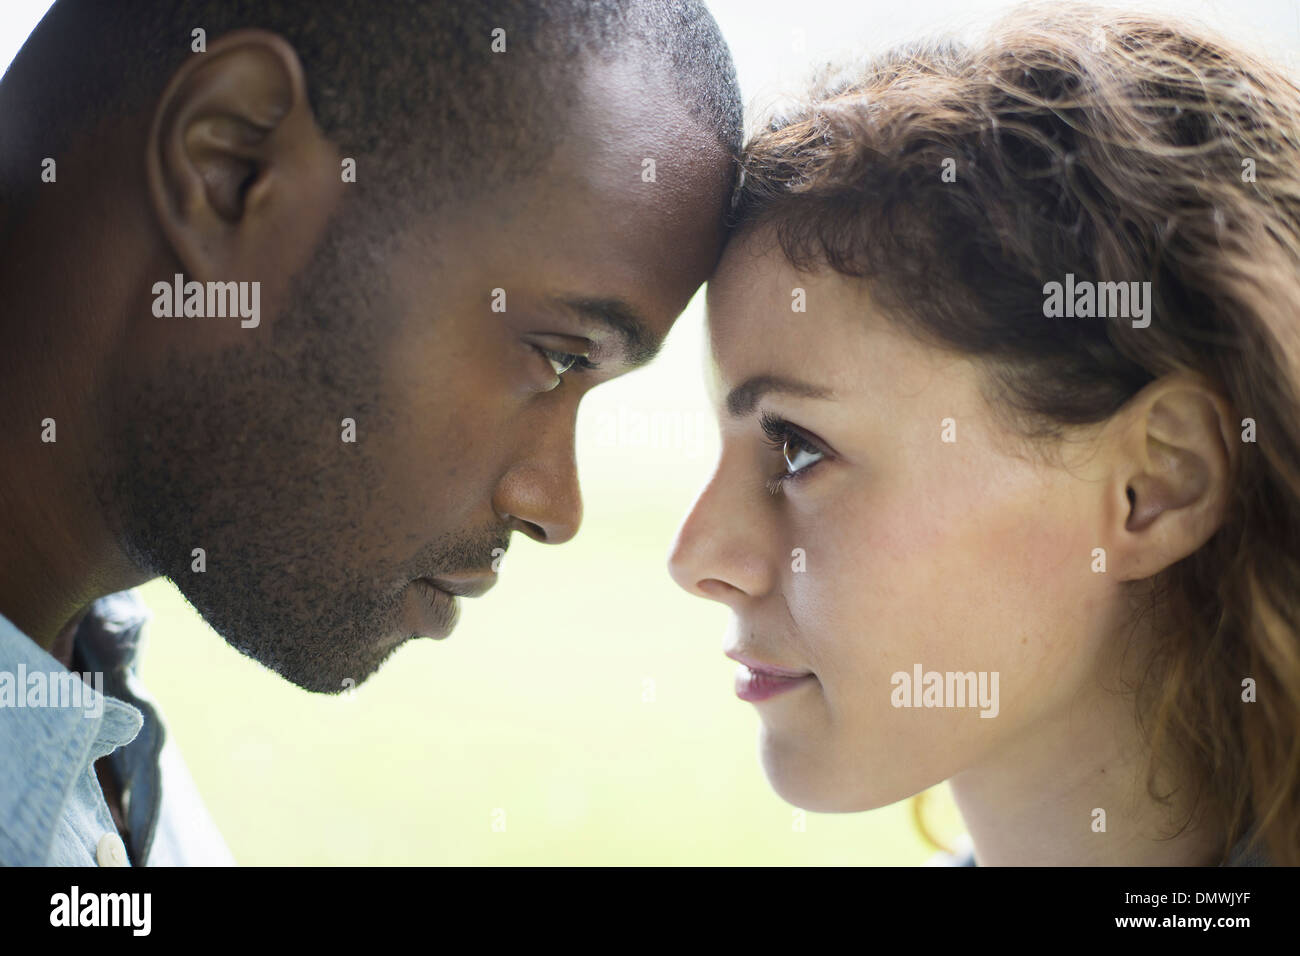 A young man and woman a couple. Touching foreheads viewed in profile. Stock Photo